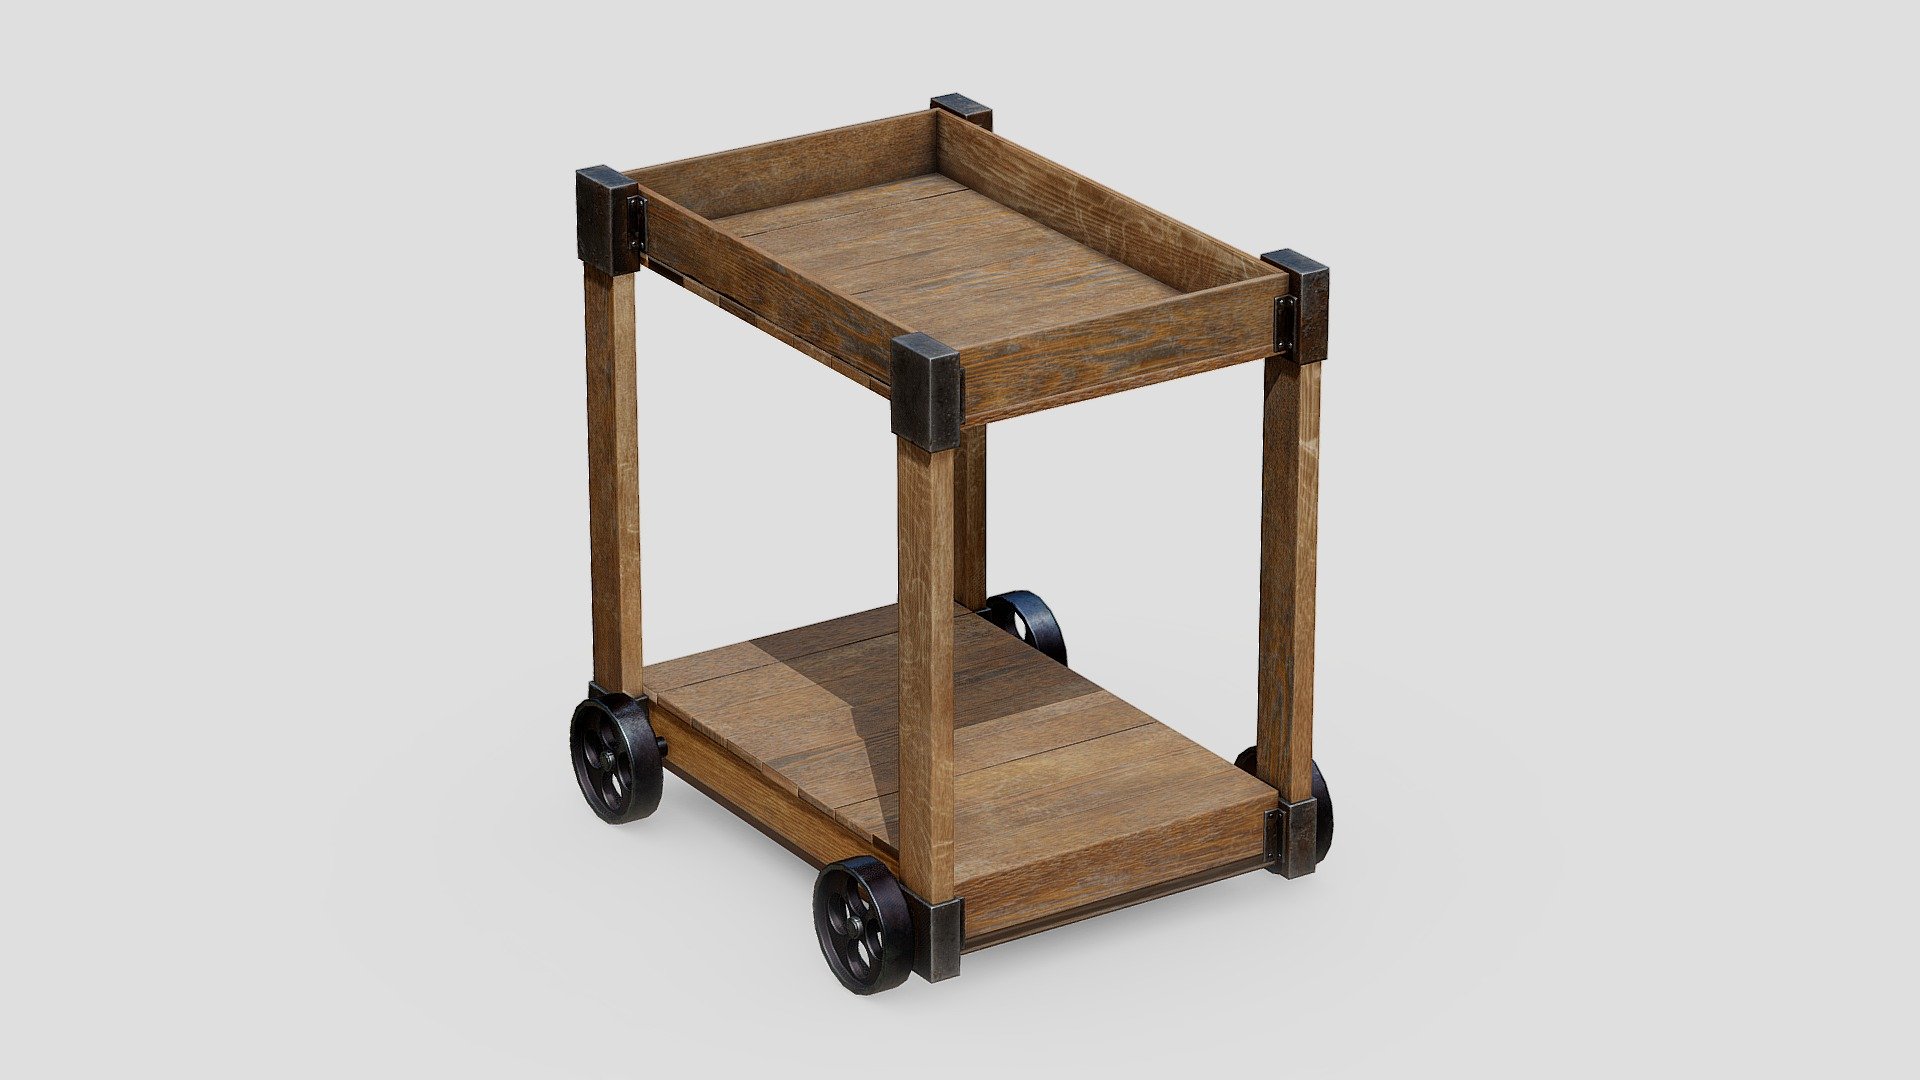 Free download：www.freepoly.org - Wood Table-Freepoly.org - Download Free 3D model by Freepoly.org (@blackrray) 3d model